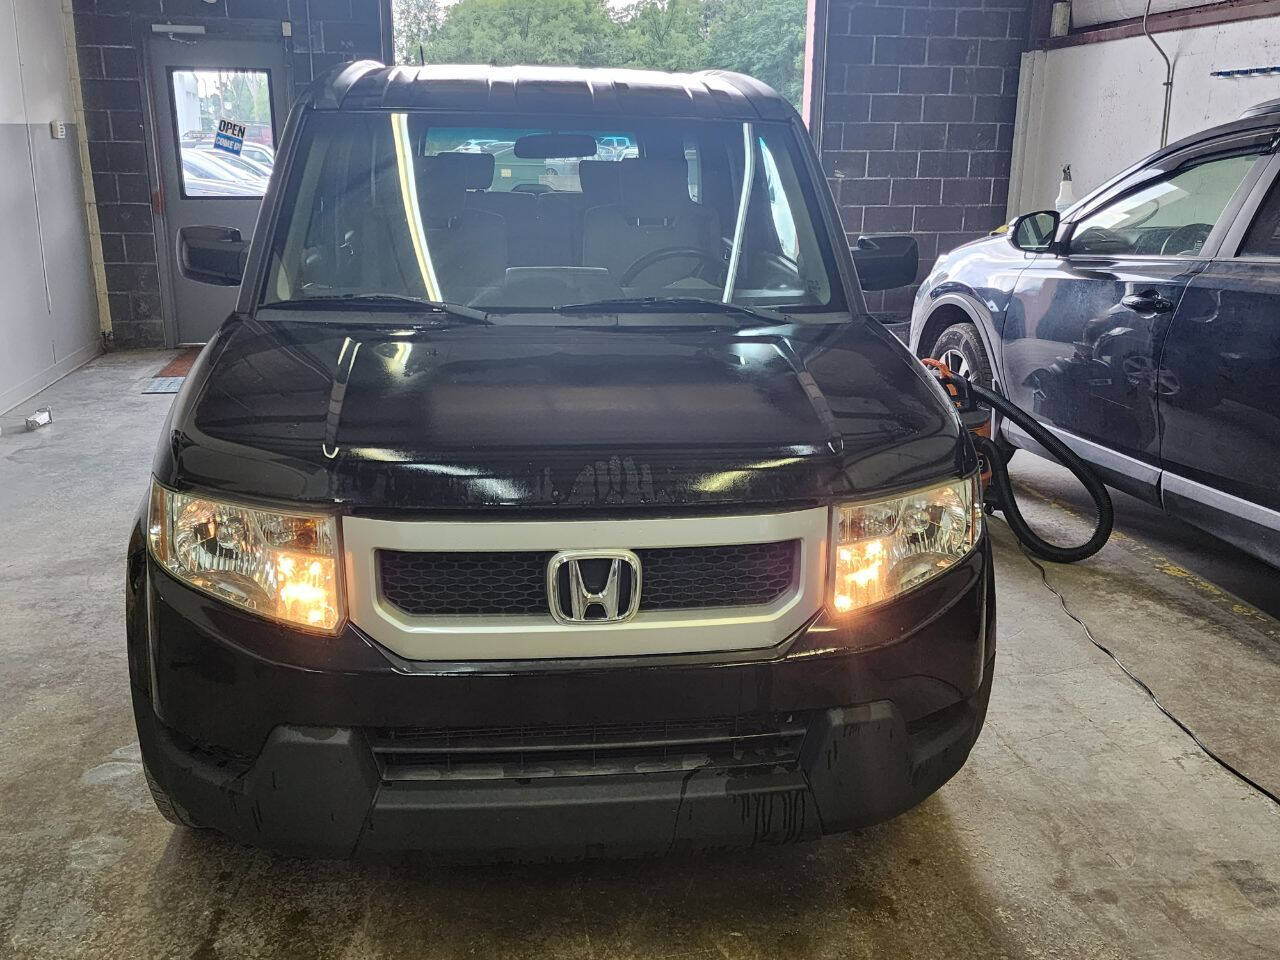 Used 2011 HONDA ELEMENT LX For Sale ($10,777)